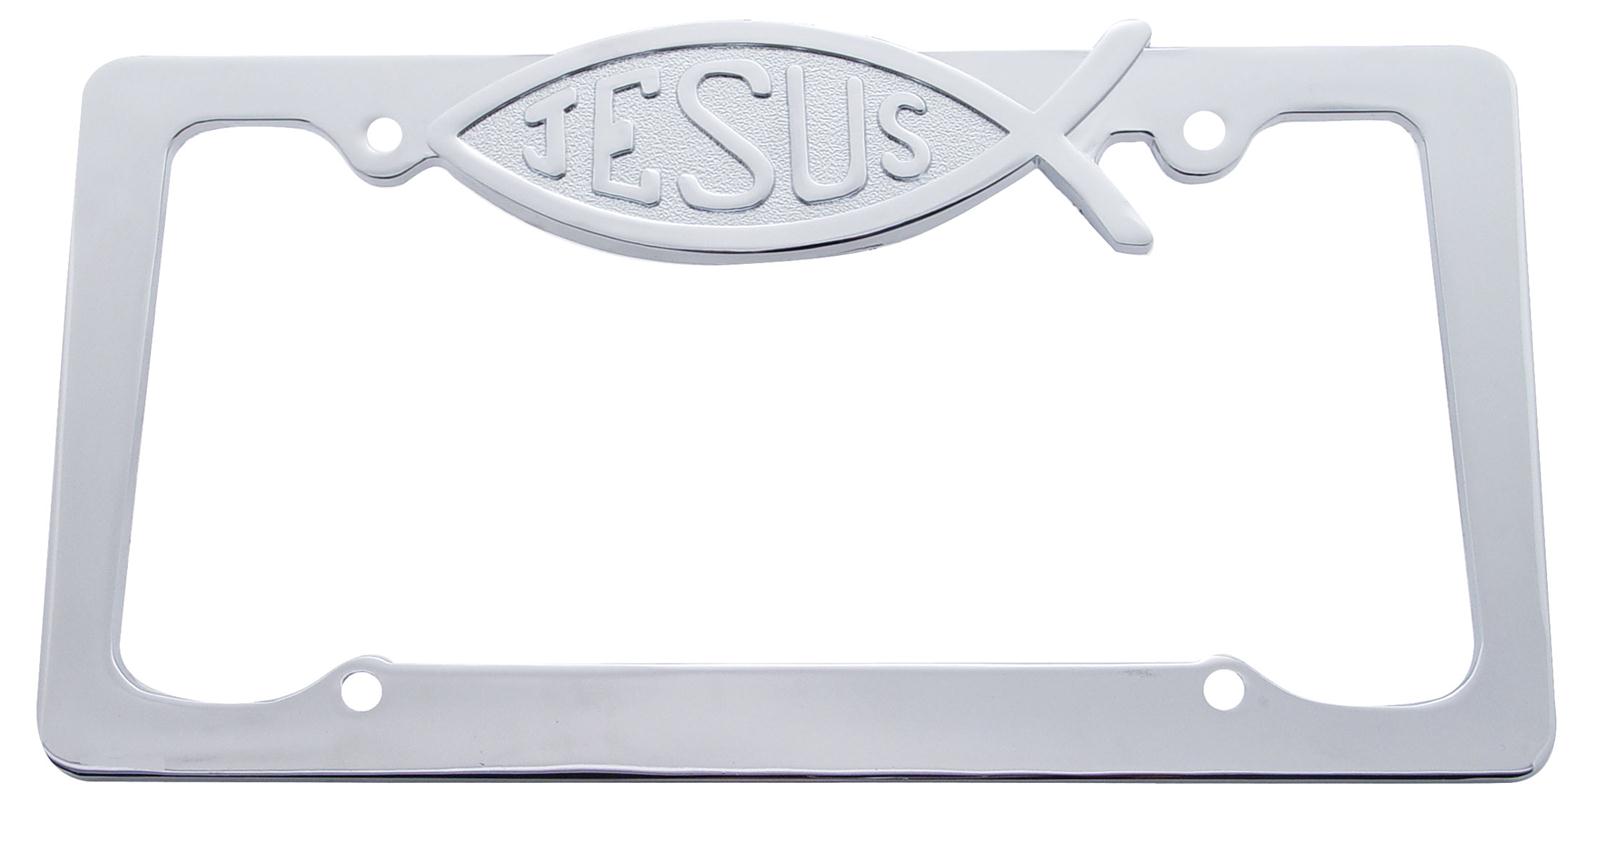 United Pacific 50042 - United Pacific License Plate Frames. upd-50042.jpg. 